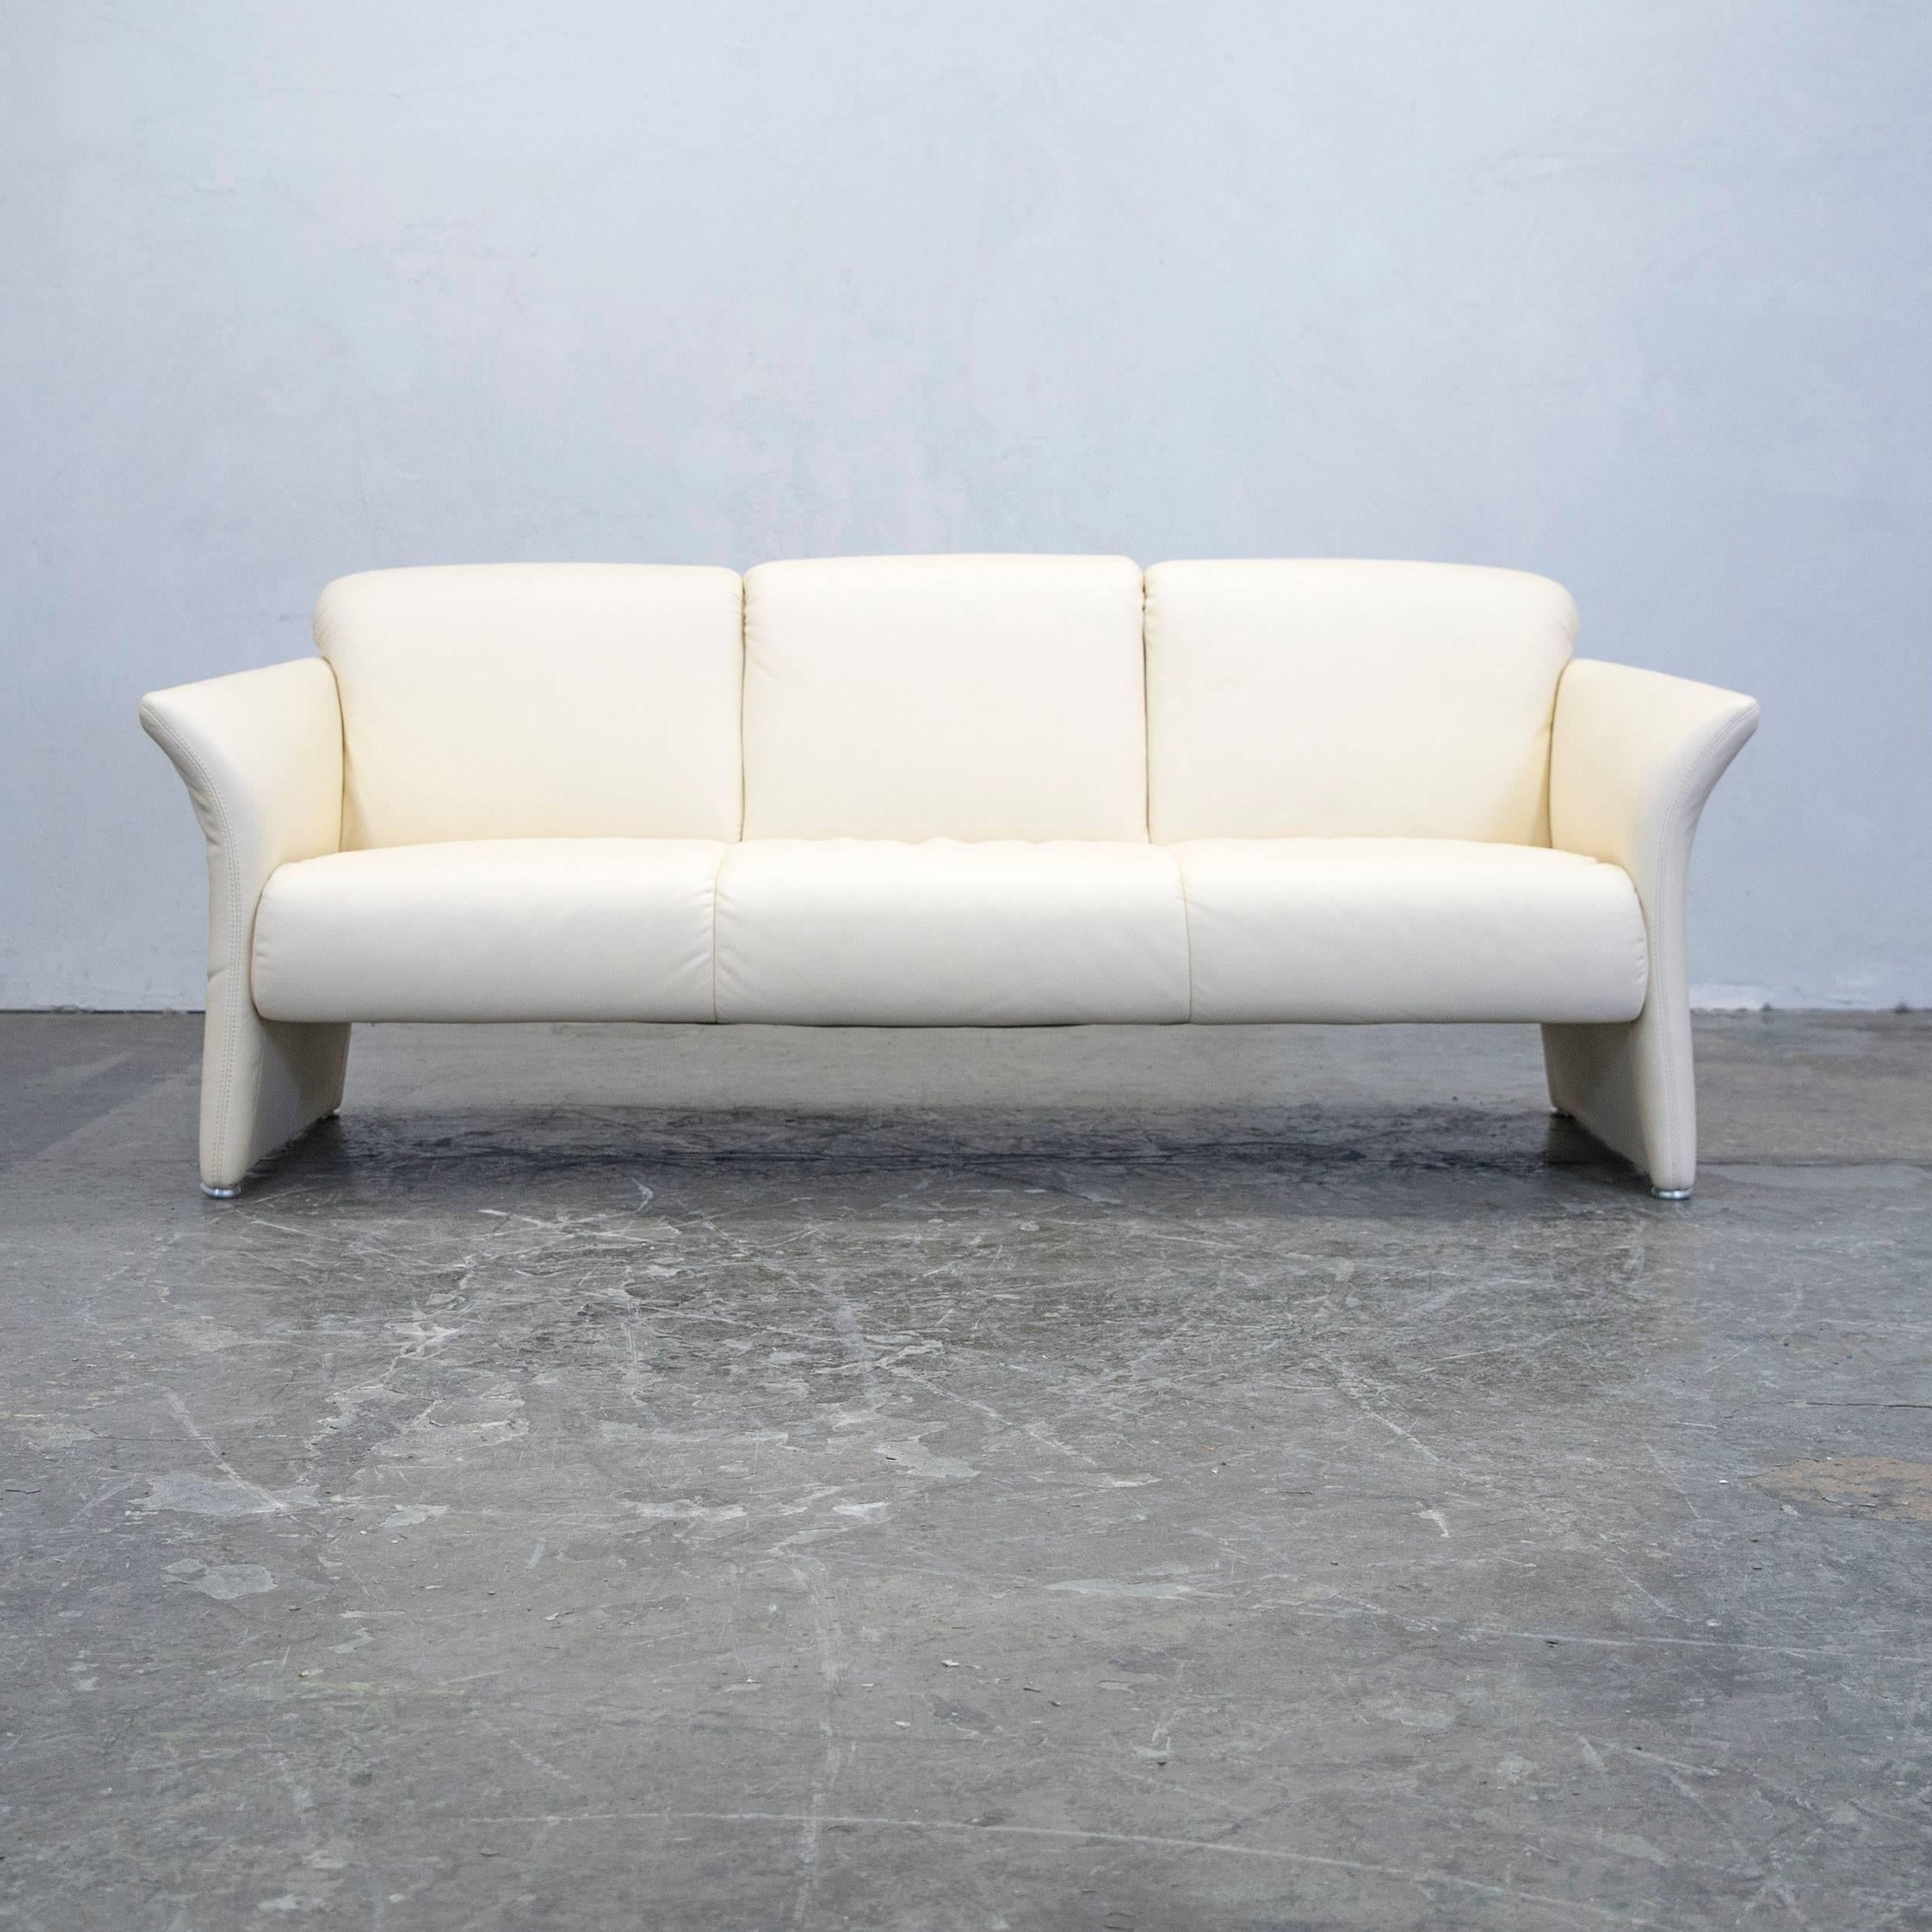 Crème colored designer leather sofa and armchairs, in a minimalistic and modern design, made for pure comfort.